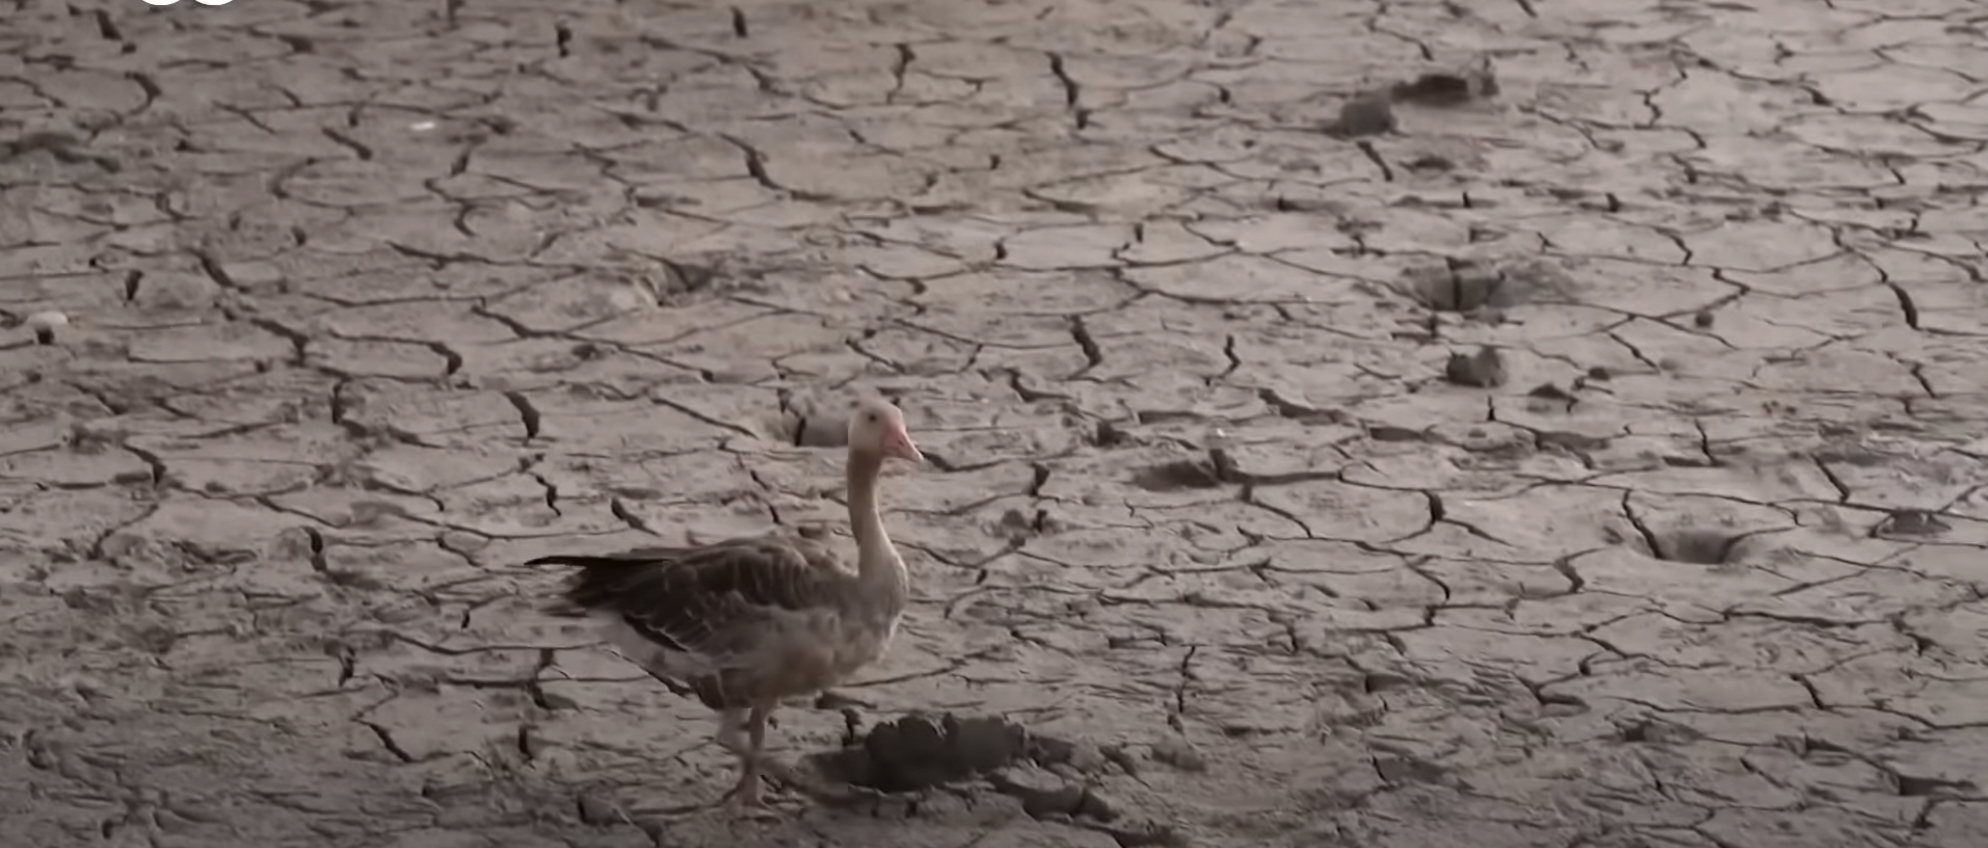 a duck walks on dried and cracked land